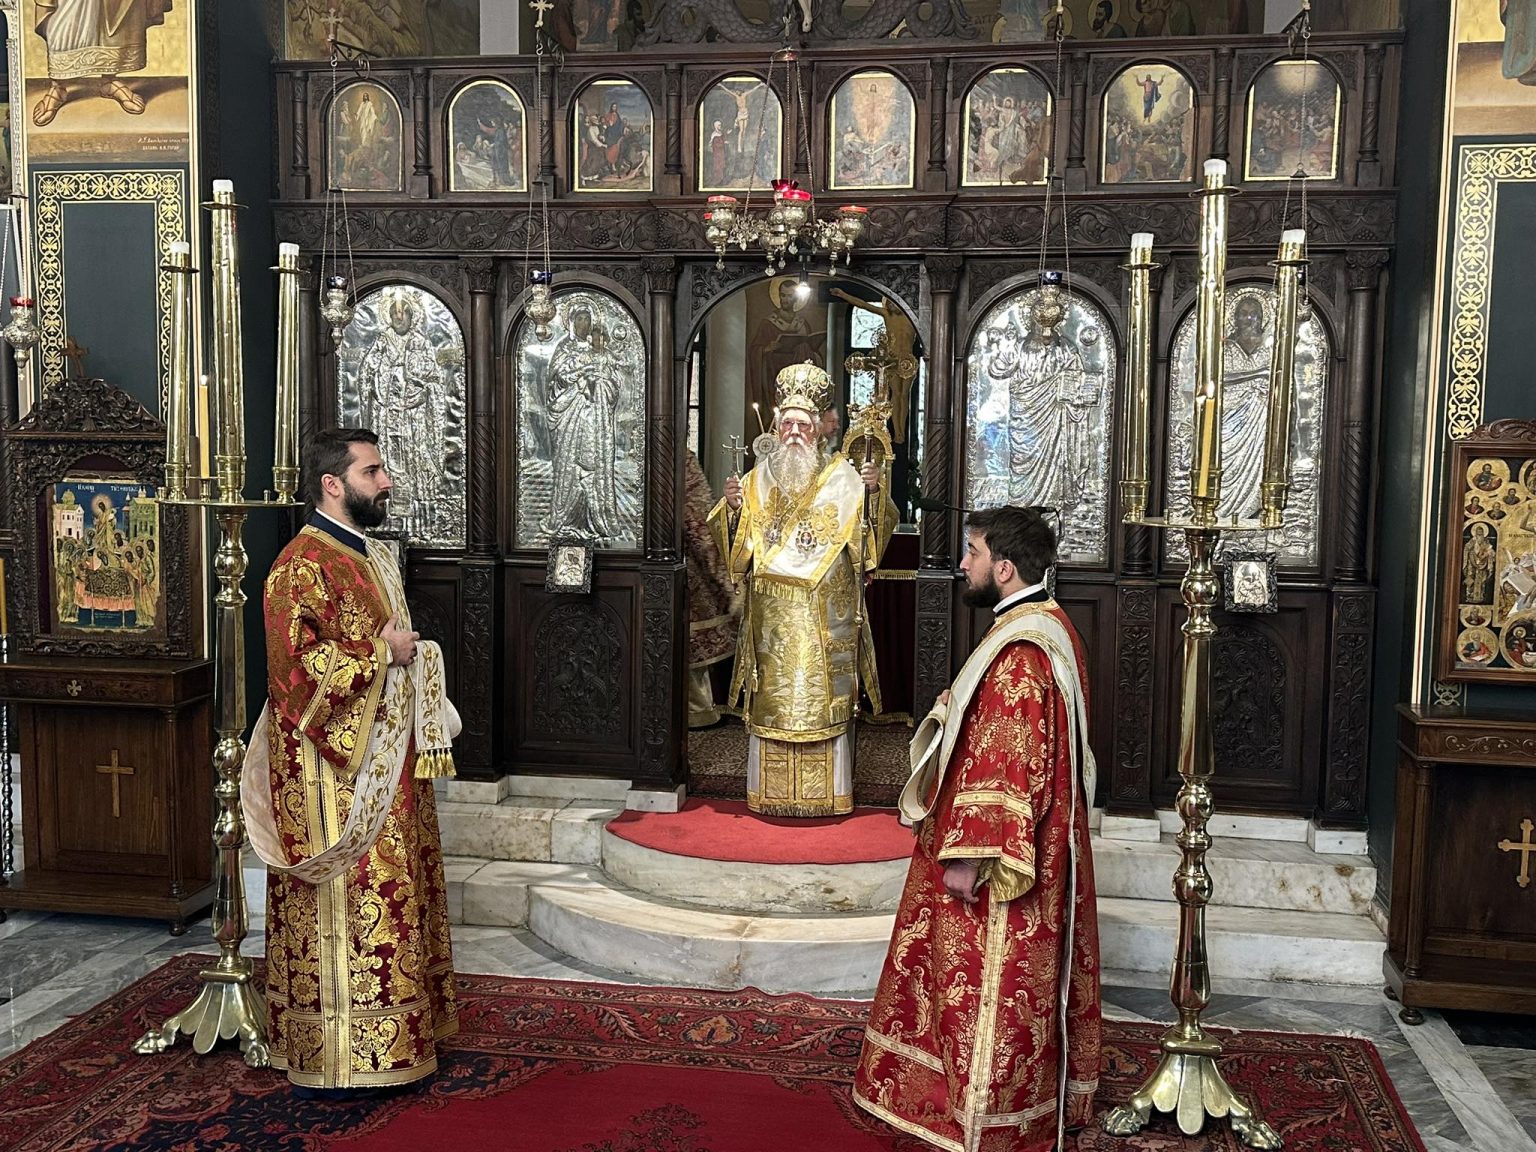 The Sunday of Zacchaeus at the Church of the Ecumenical Patriarchate in Athens